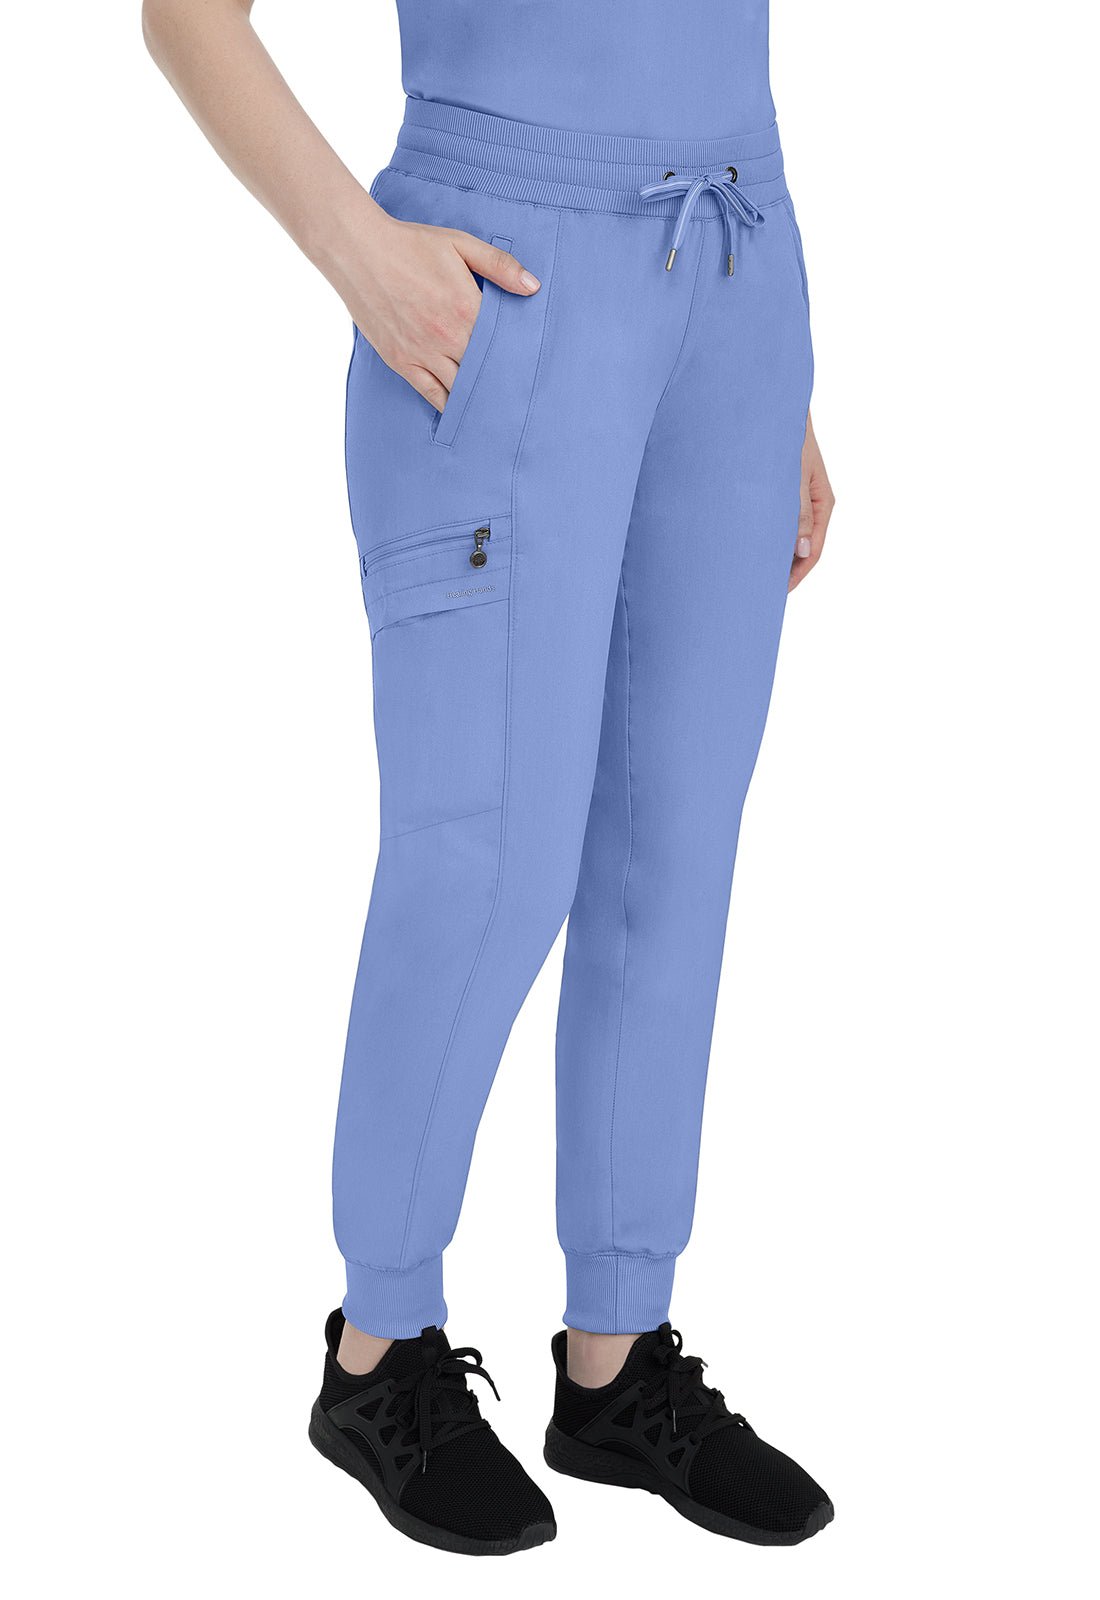 Healing Hands Toby Jogger Pant 9244 in Ceil, Hunter, Teal, White - Scrubs Select